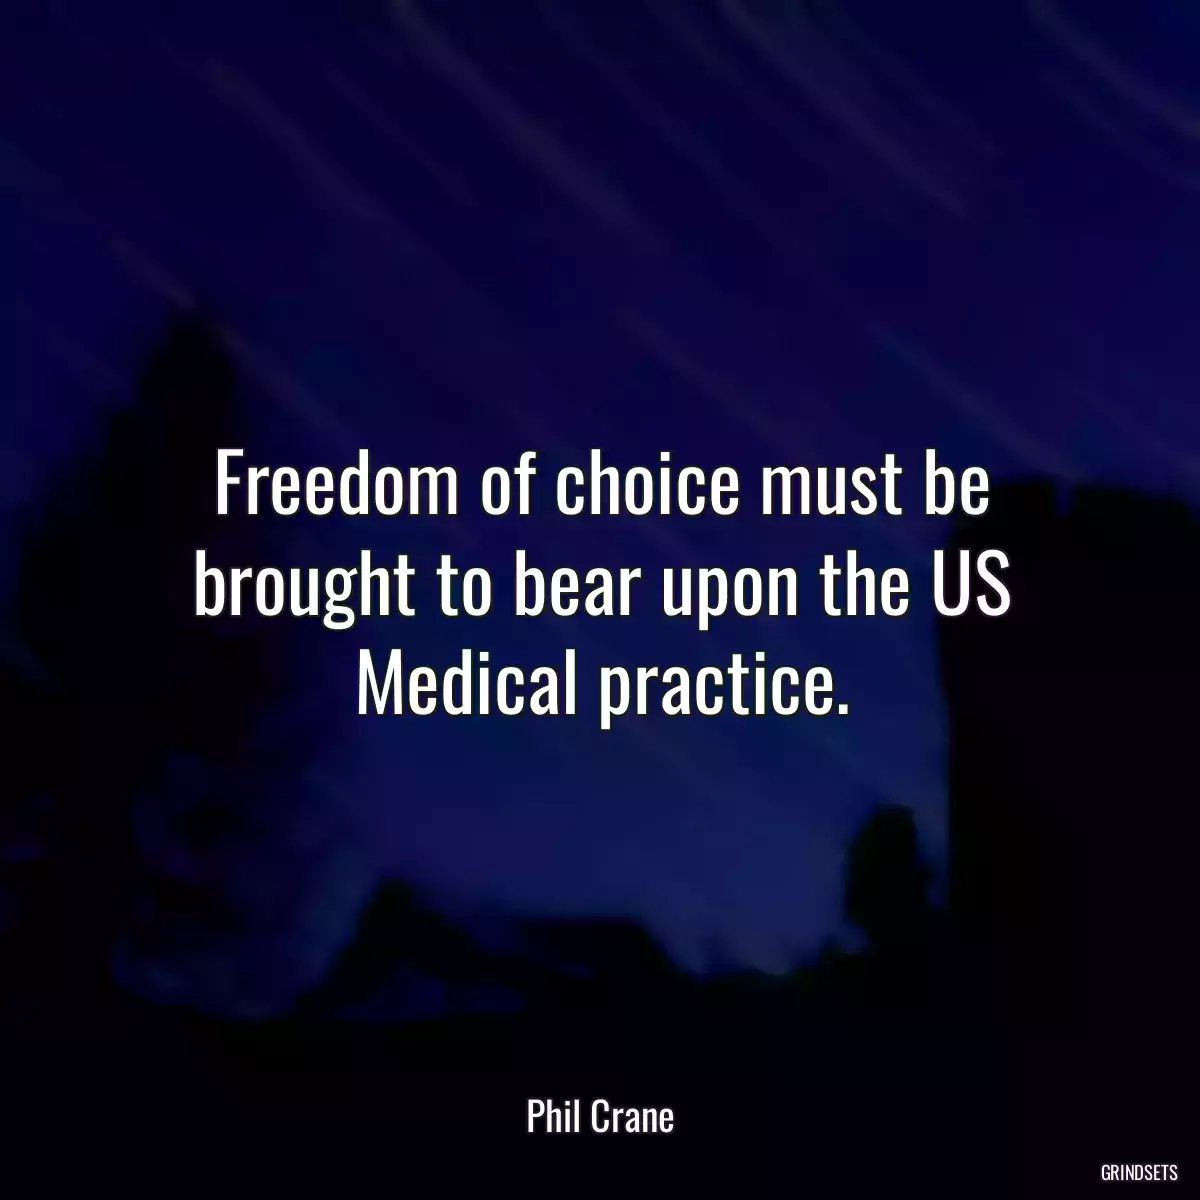 Freedom of choice must be brought to bear upon the US Medical practice.